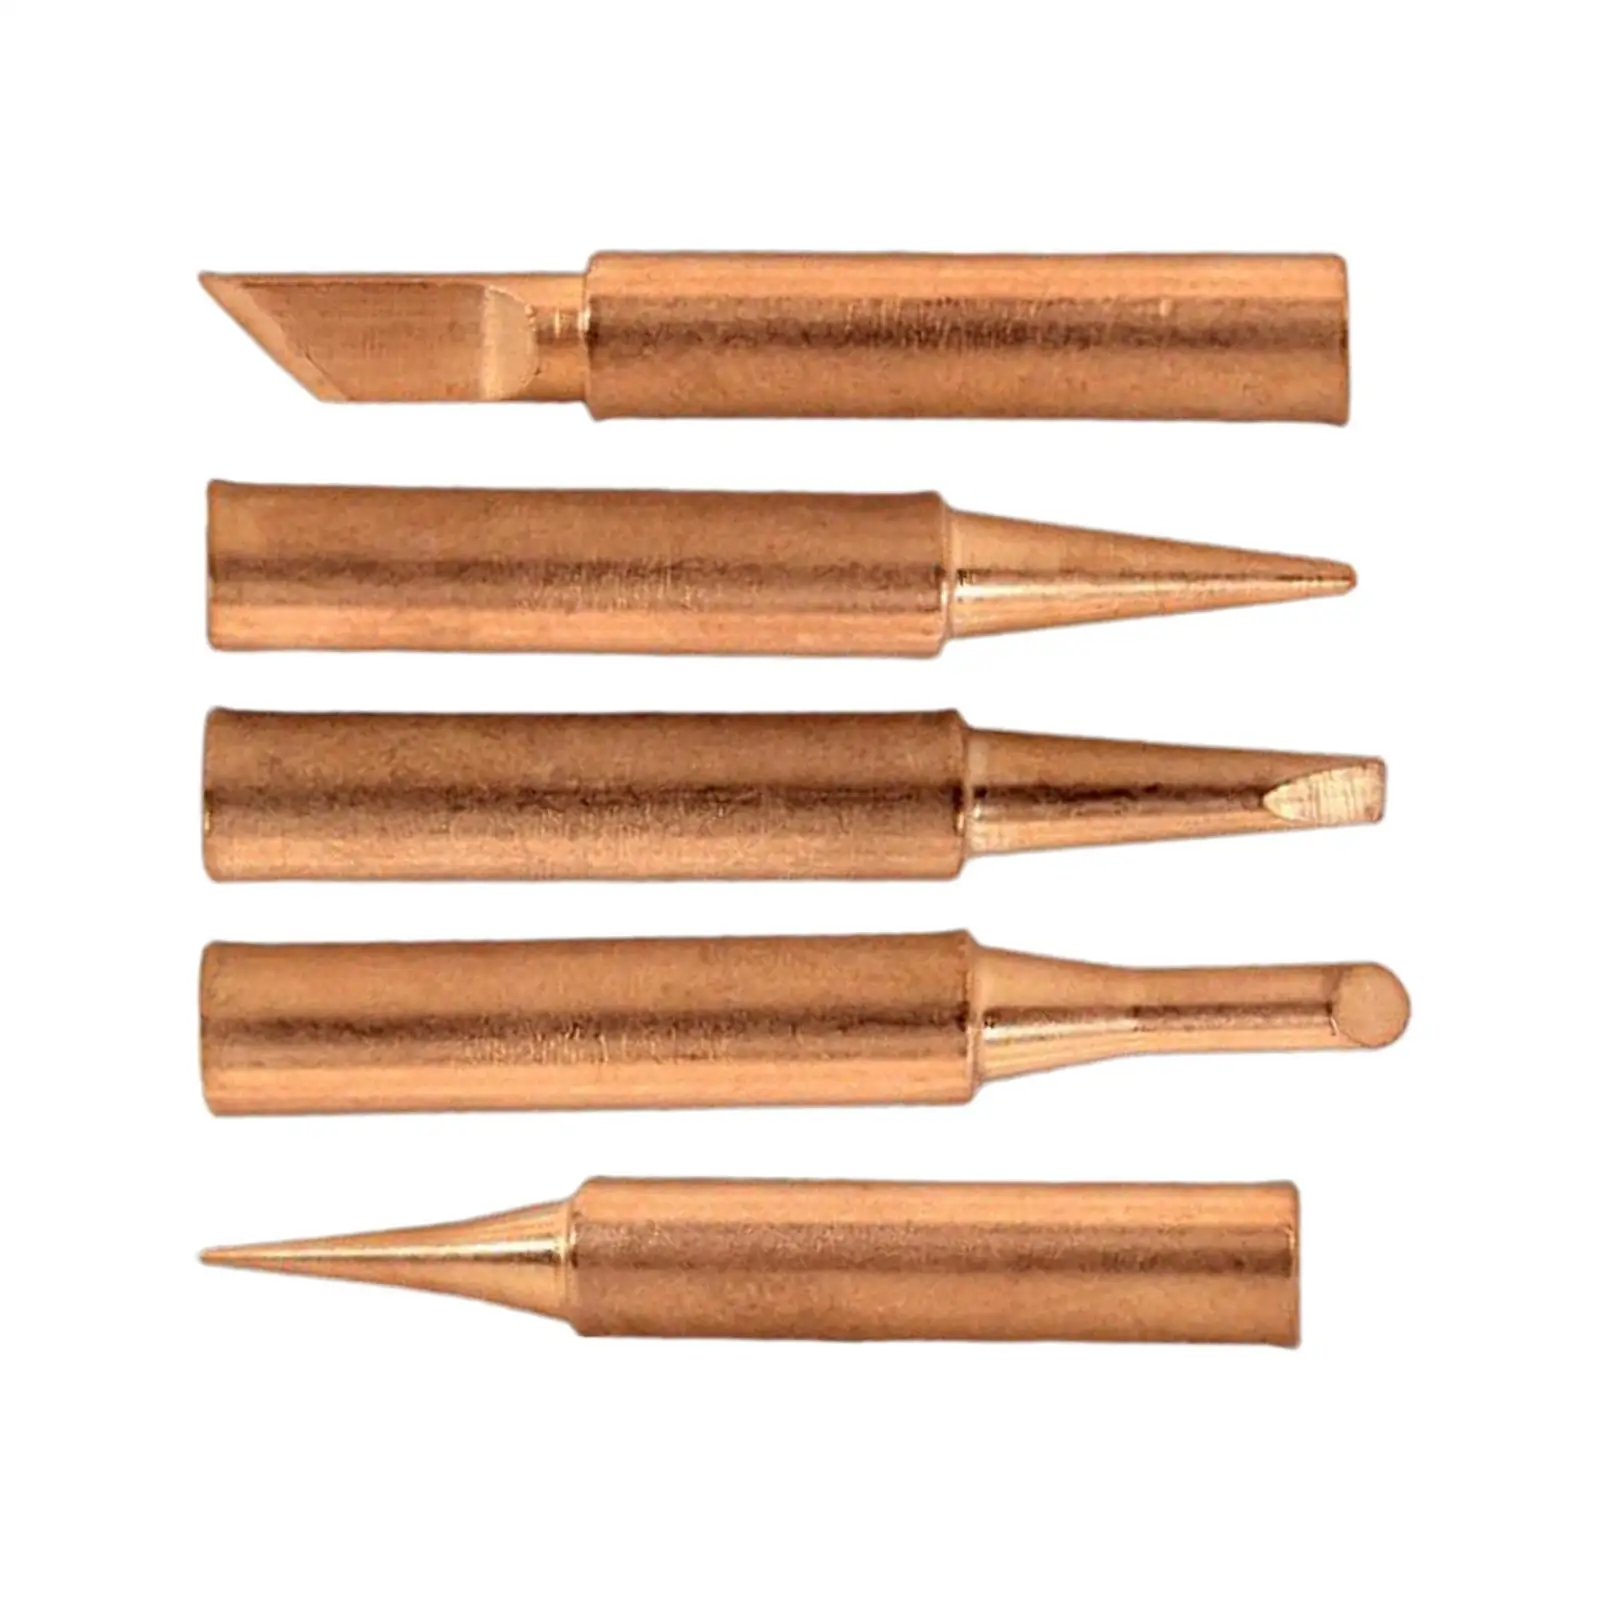 5X Soldering Iron Tips  Soldering Soldering Replaces for 900M 936